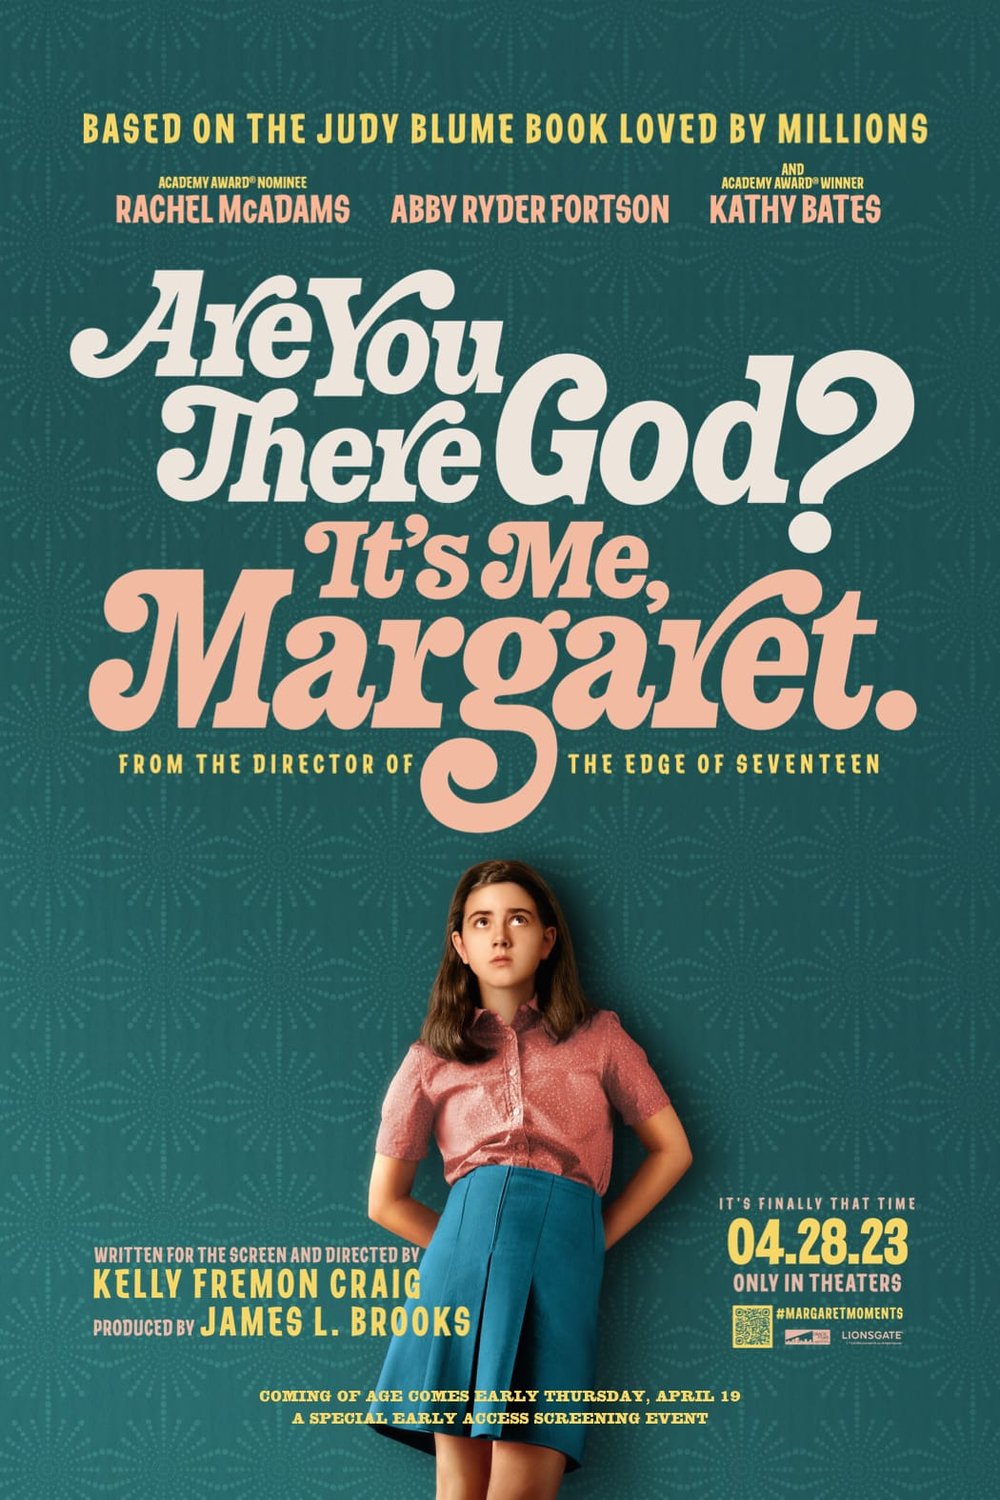 Poster of the movie Are You There God? It's Me, Margaret.